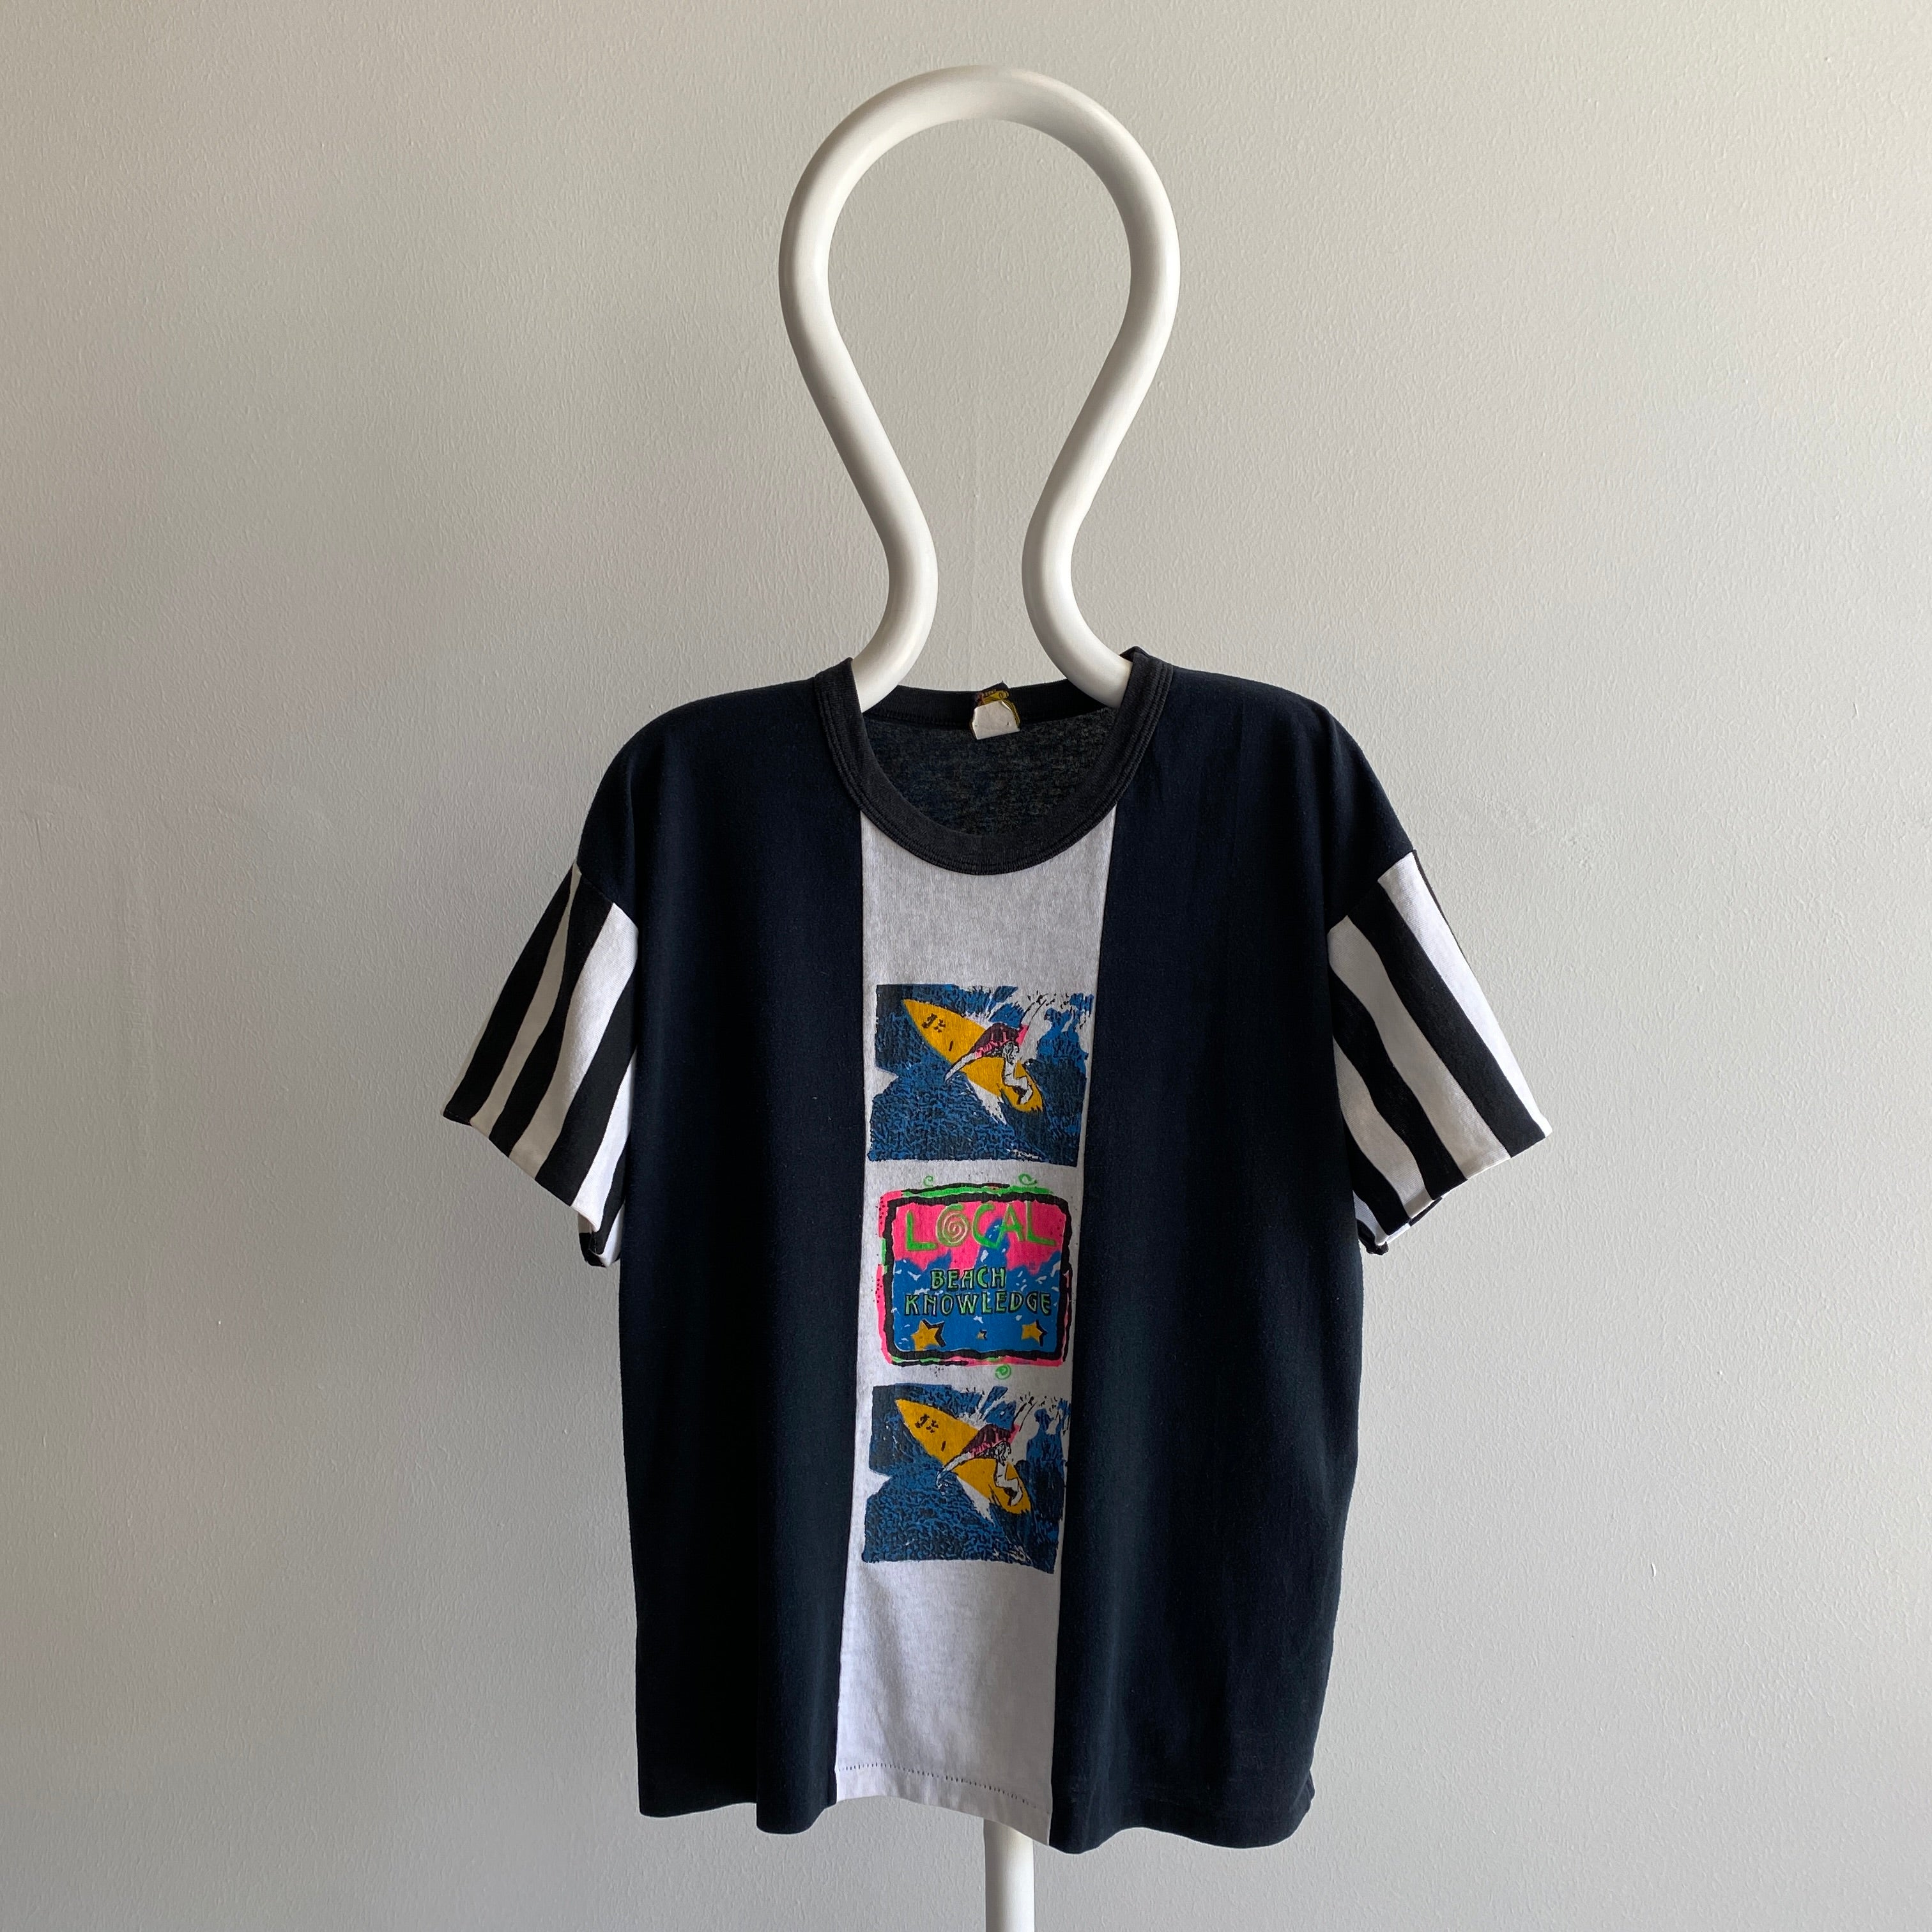 1980s Color Block Trade Winds Surfer T-Shirt with Striped Sleeves